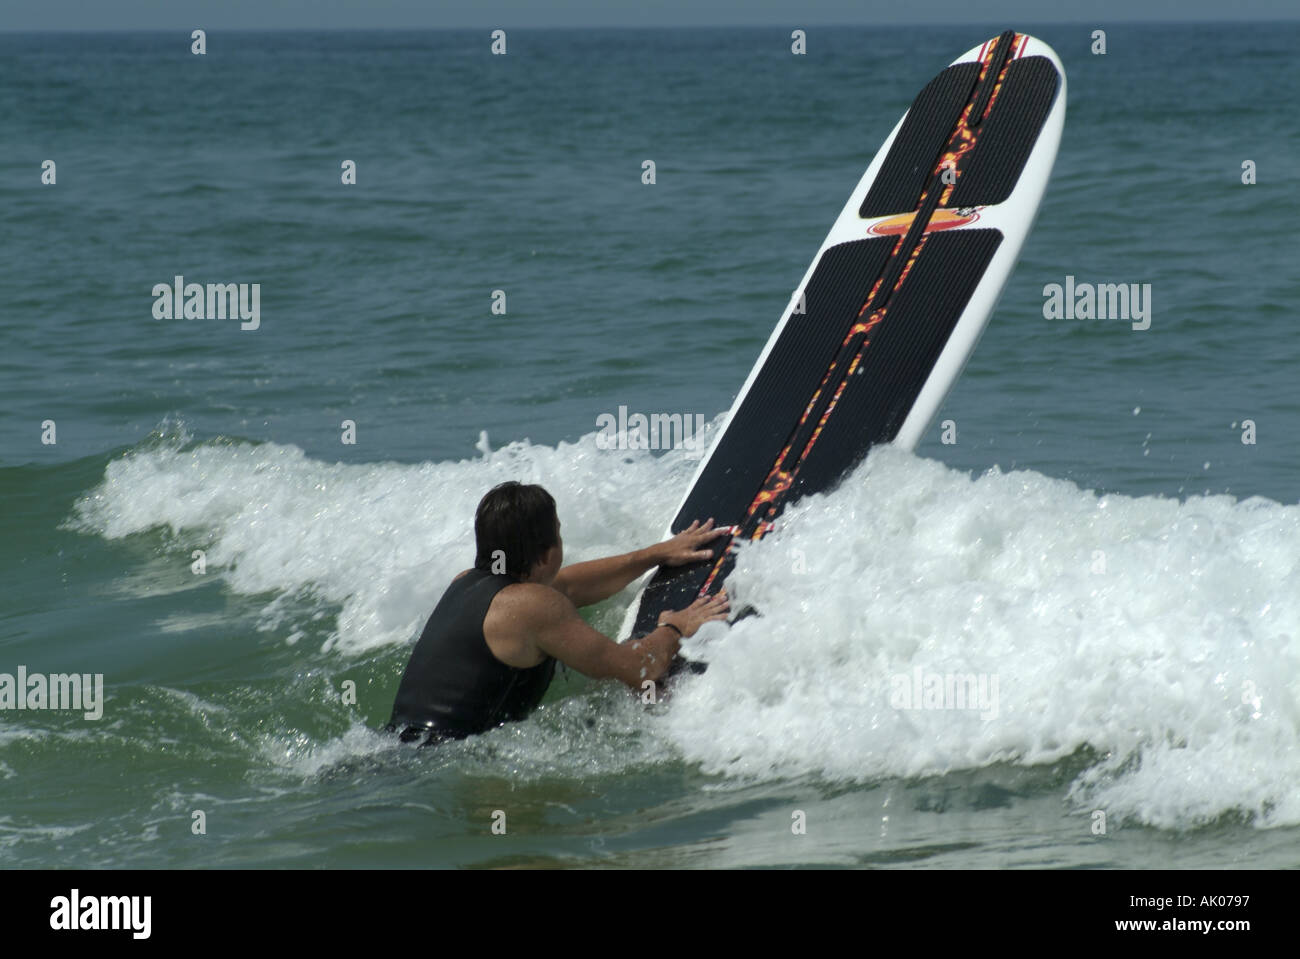 Man surfing a wave at Le Porge beach, Gironde, France. Stock Photo